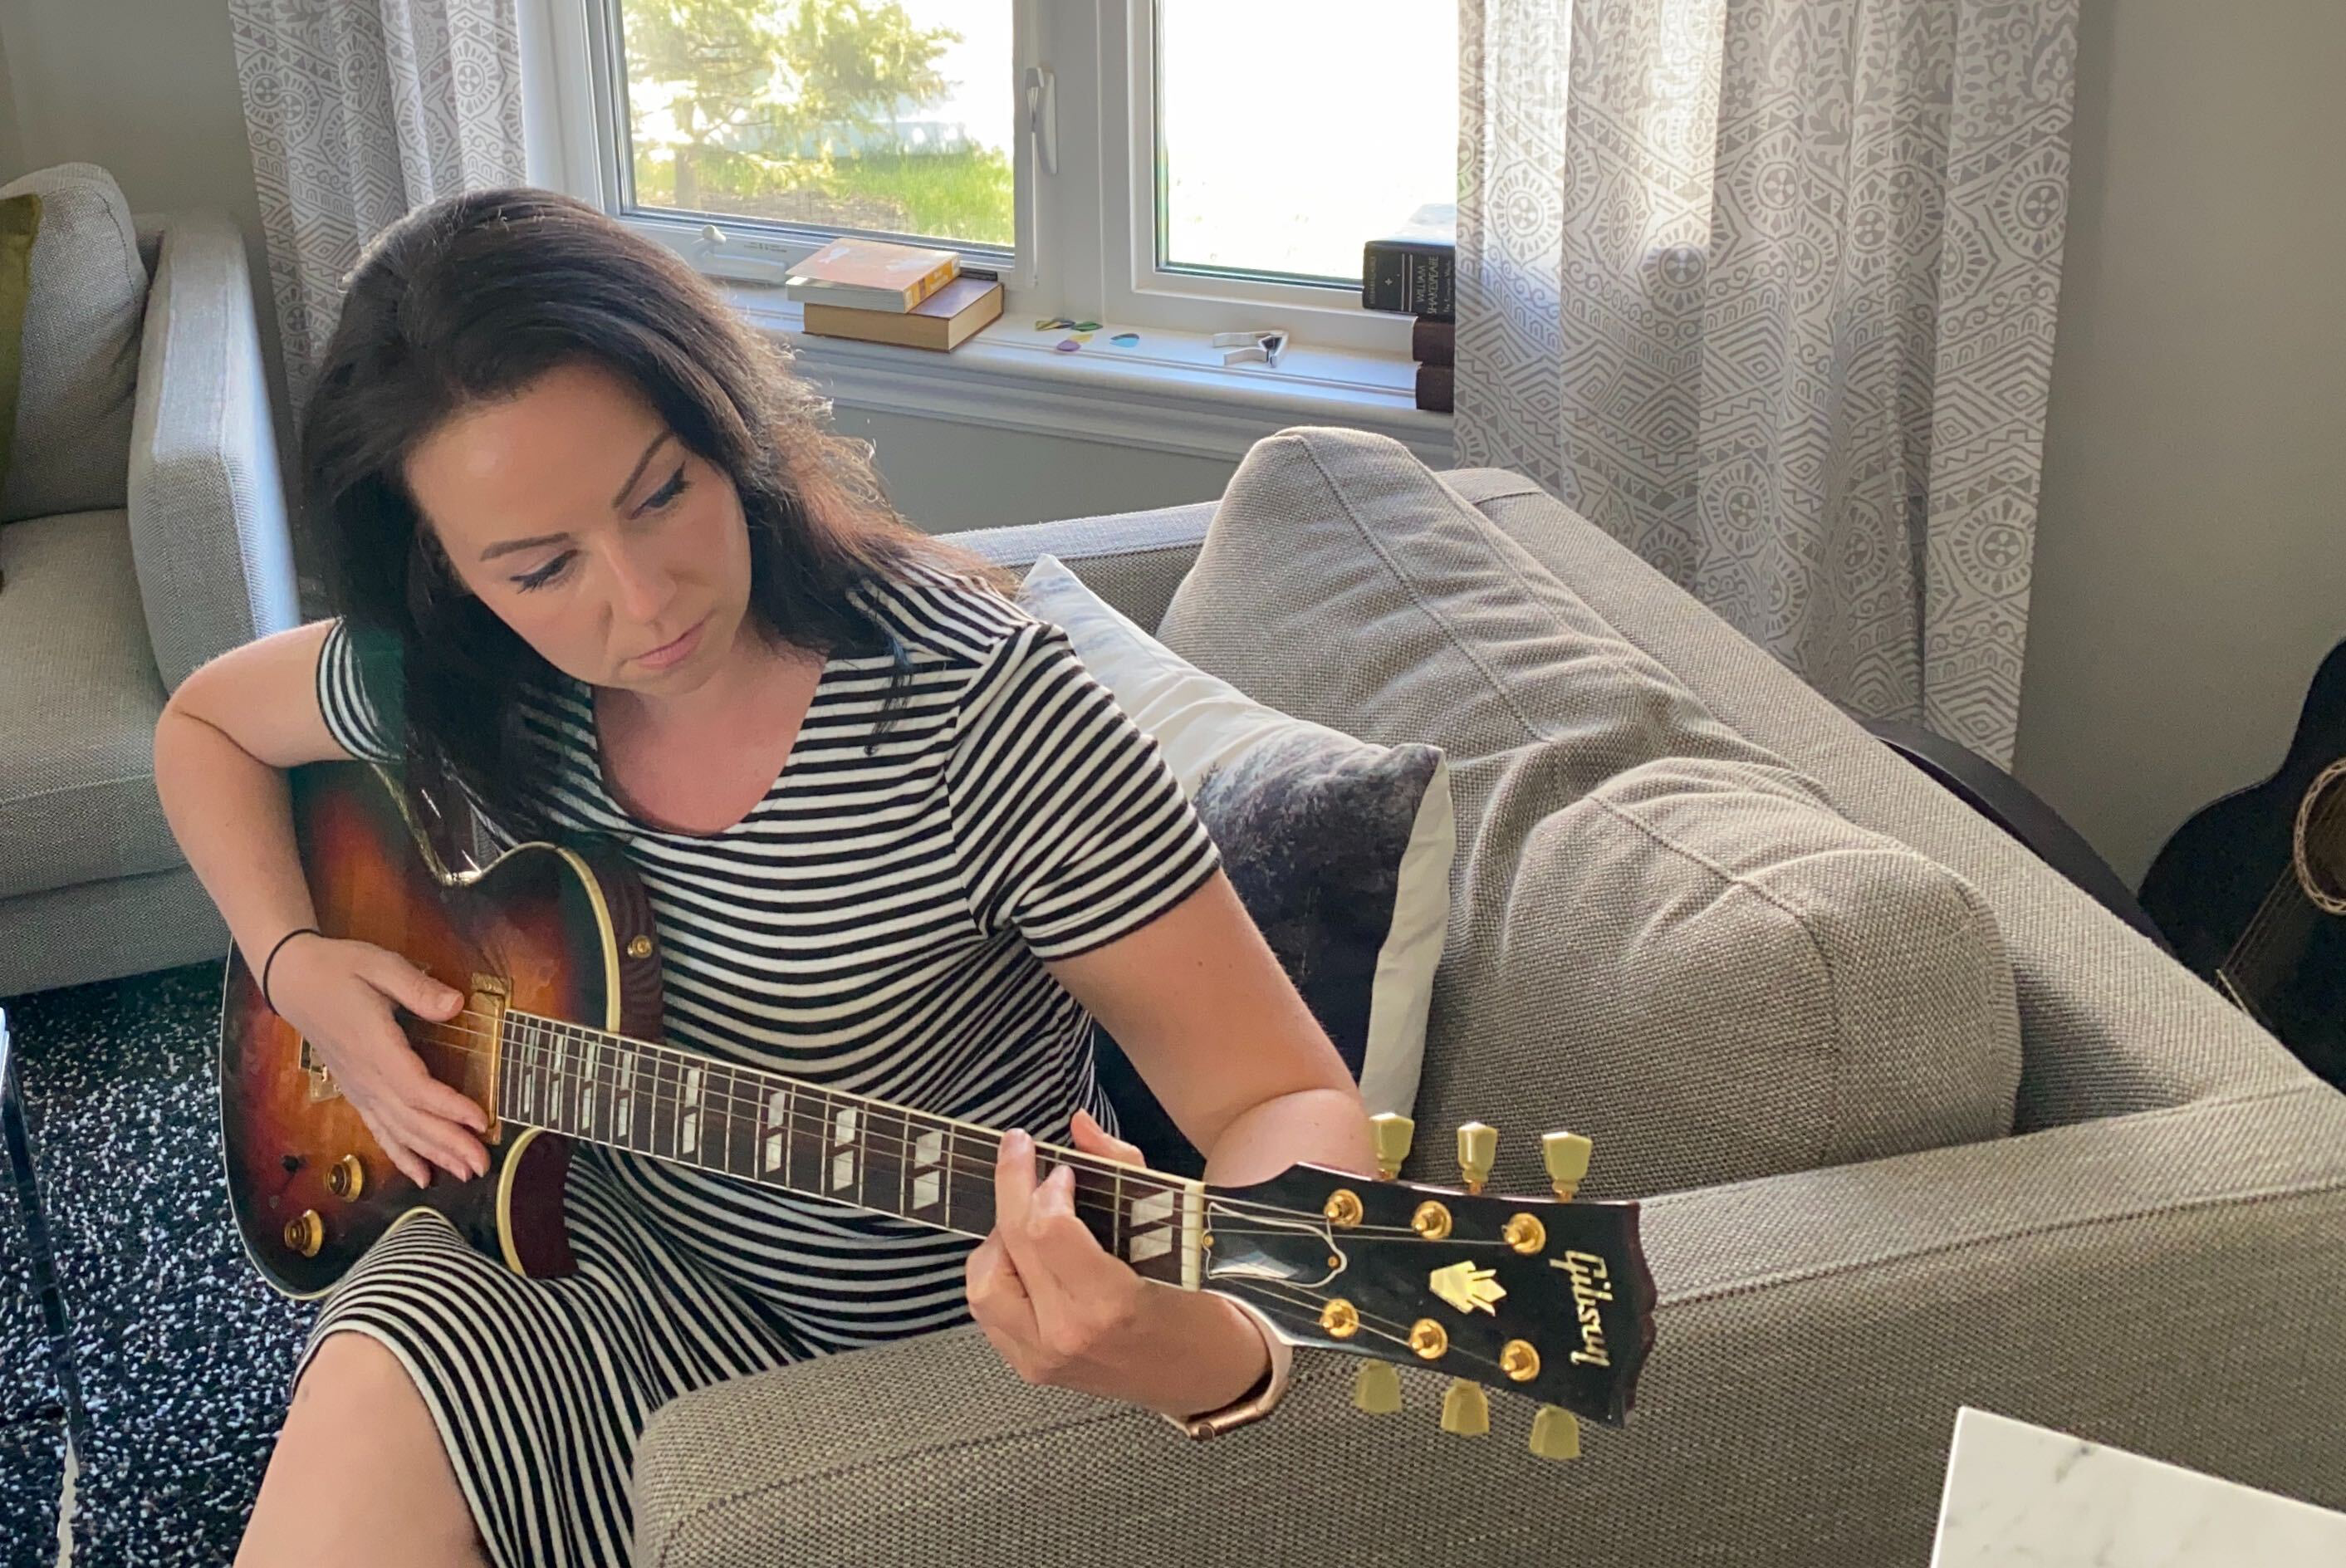 Bandzoogle CEO Stacey Bedfor plays guitar in her home.